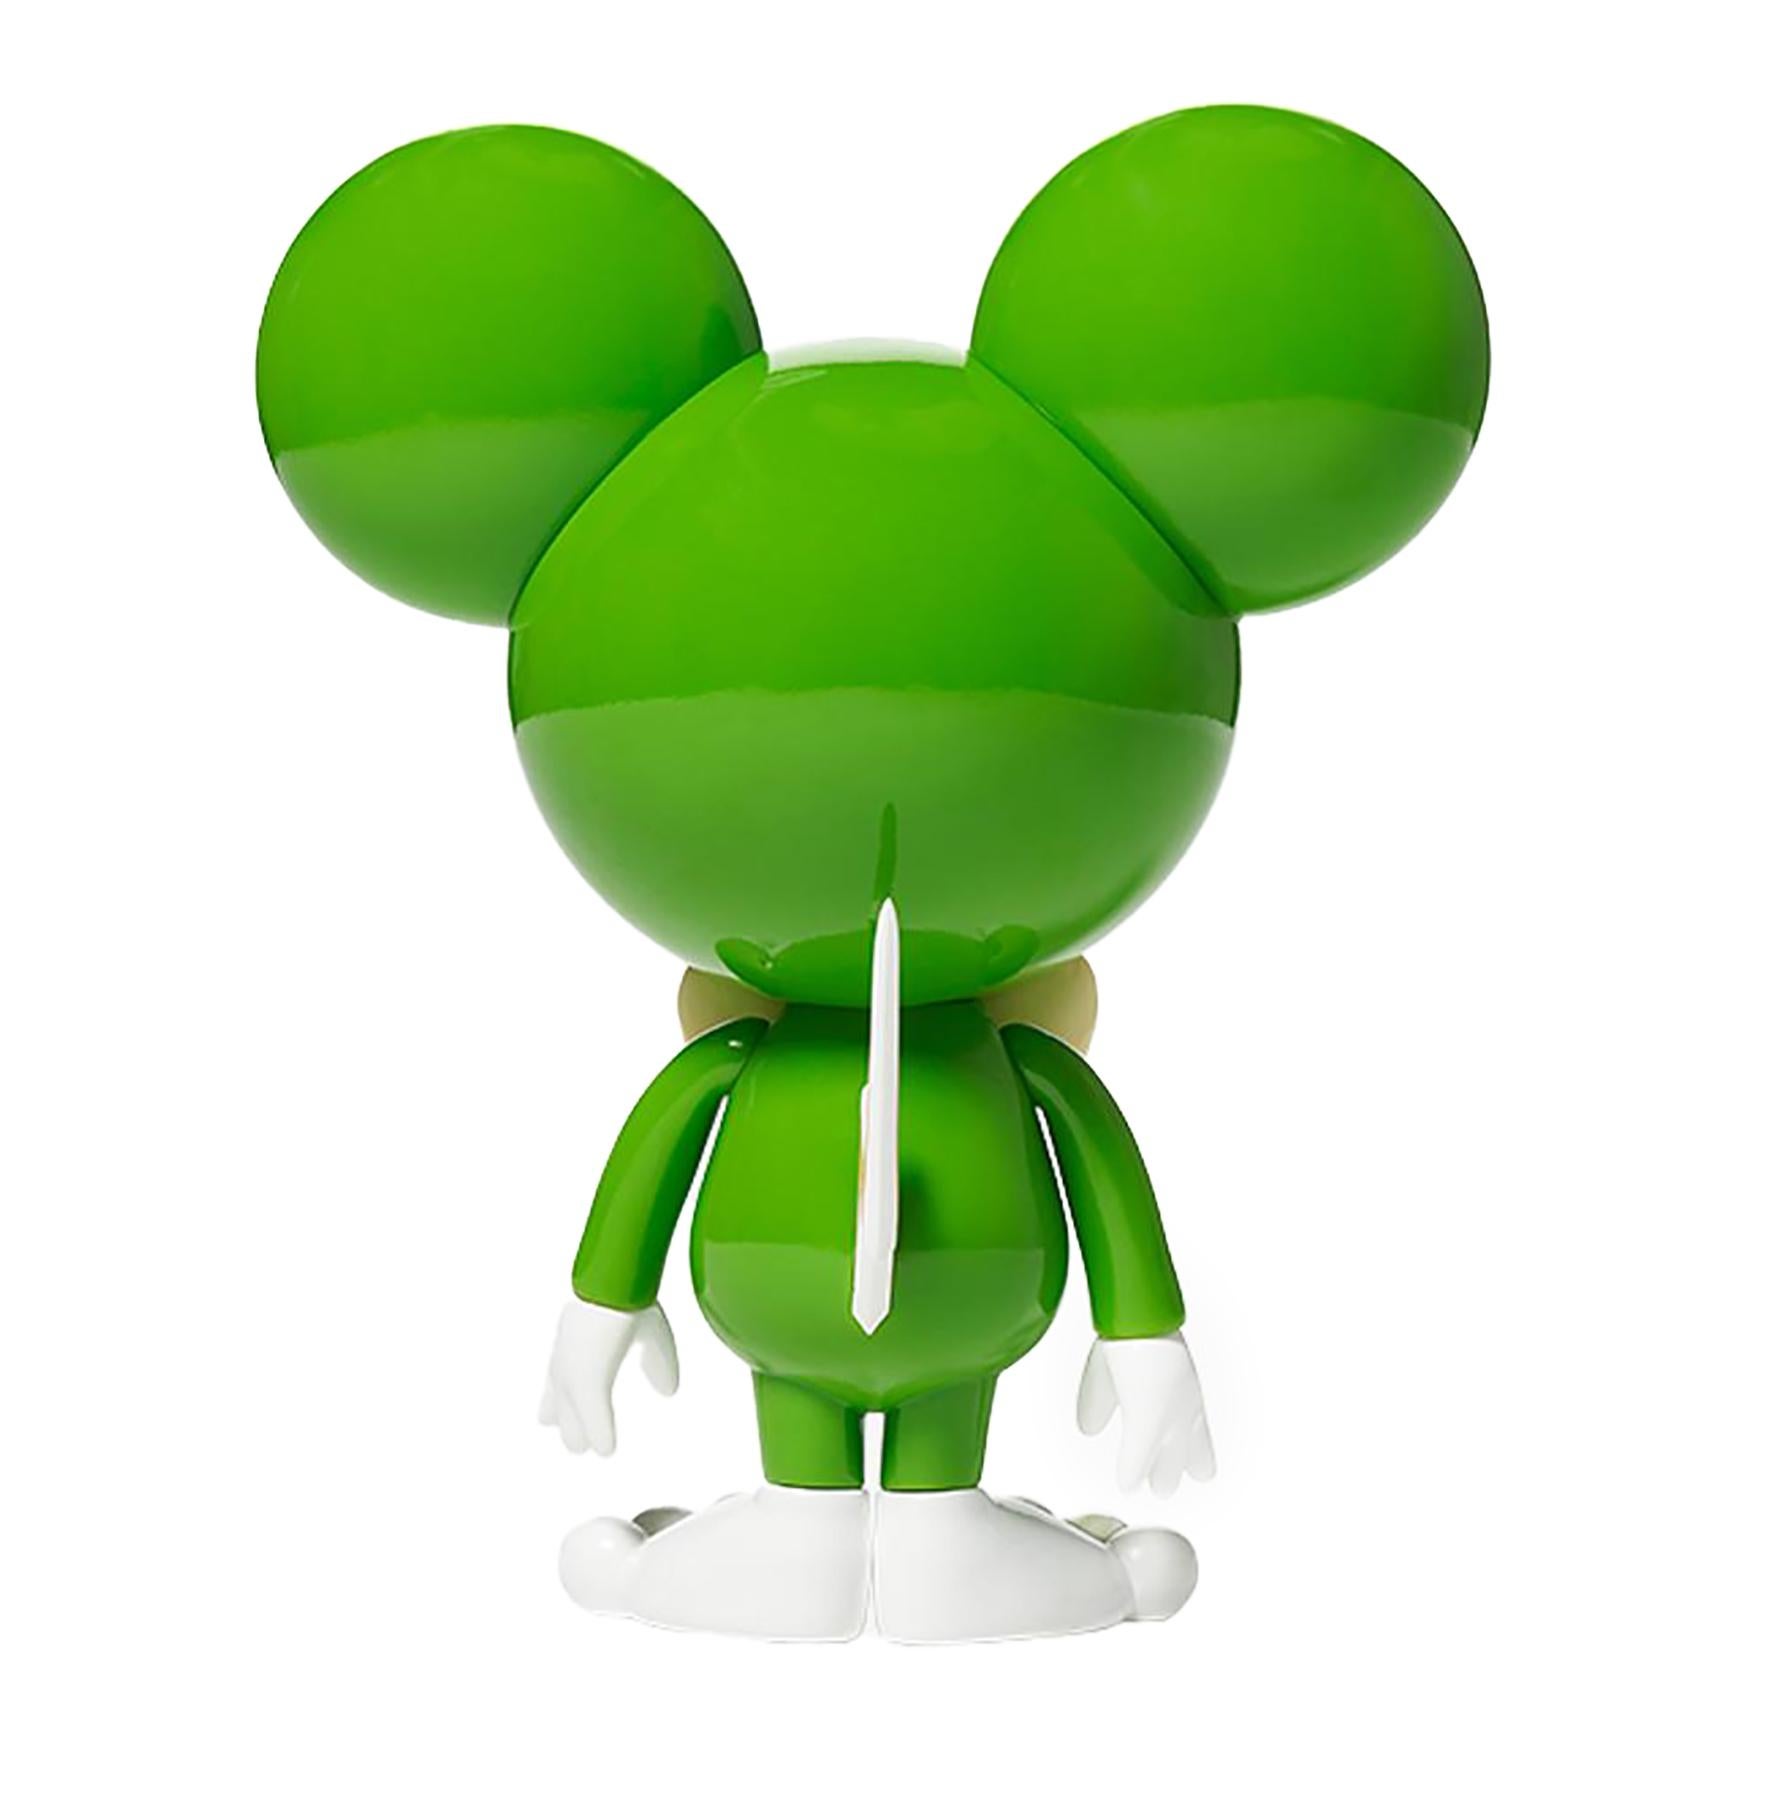 Takashi Murakami DOB-kun Figure (Takashi Murakami Mr. Dob):
A limited edition Takashi Murakami Mr. DOB art toy featuring the artist's iconic DOB character. DOB-kun’s name, defined in his rounded ears and face, is the first three letters of an